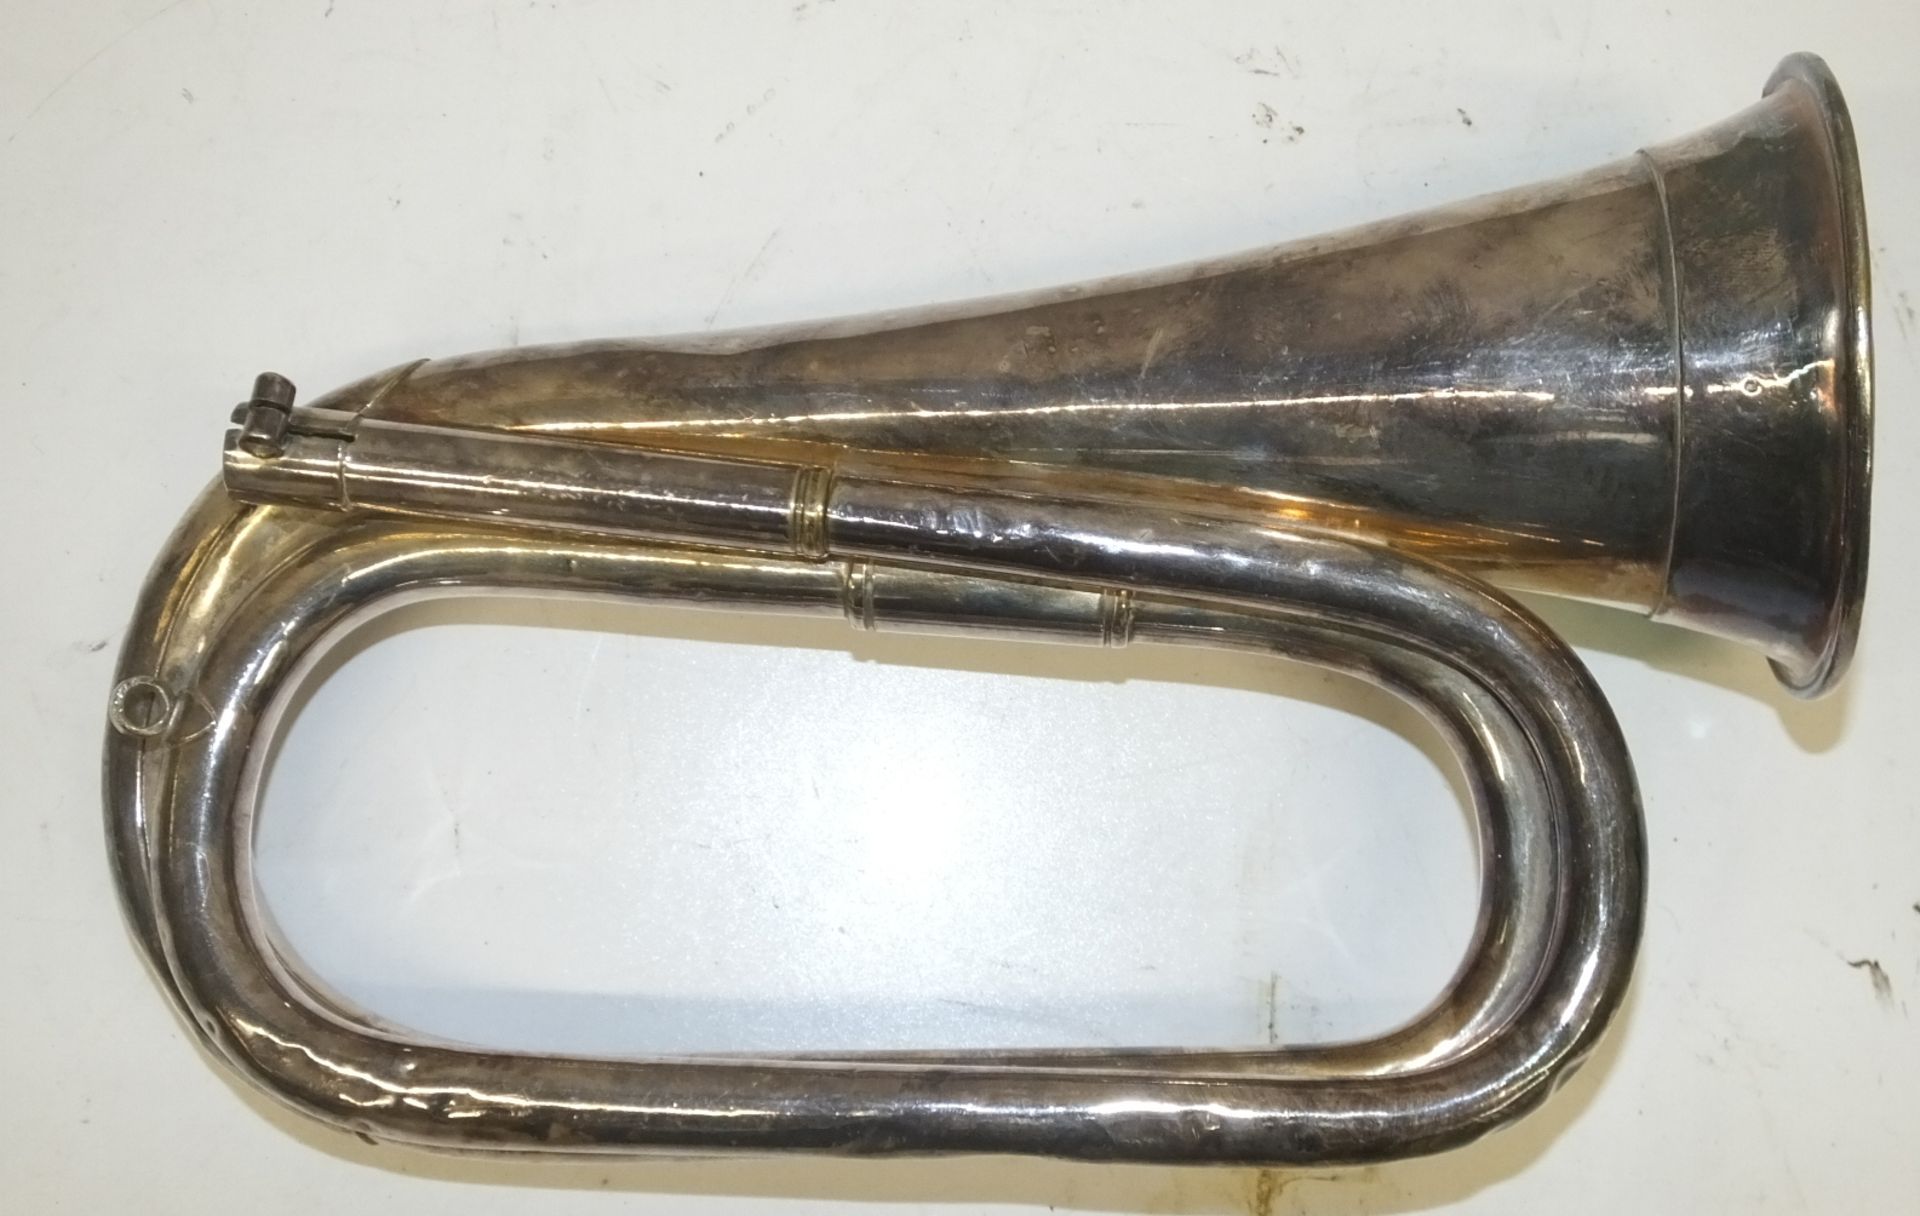 McQueens Bugle - Serial Number - 952 (no lead pipe and excessive dents)